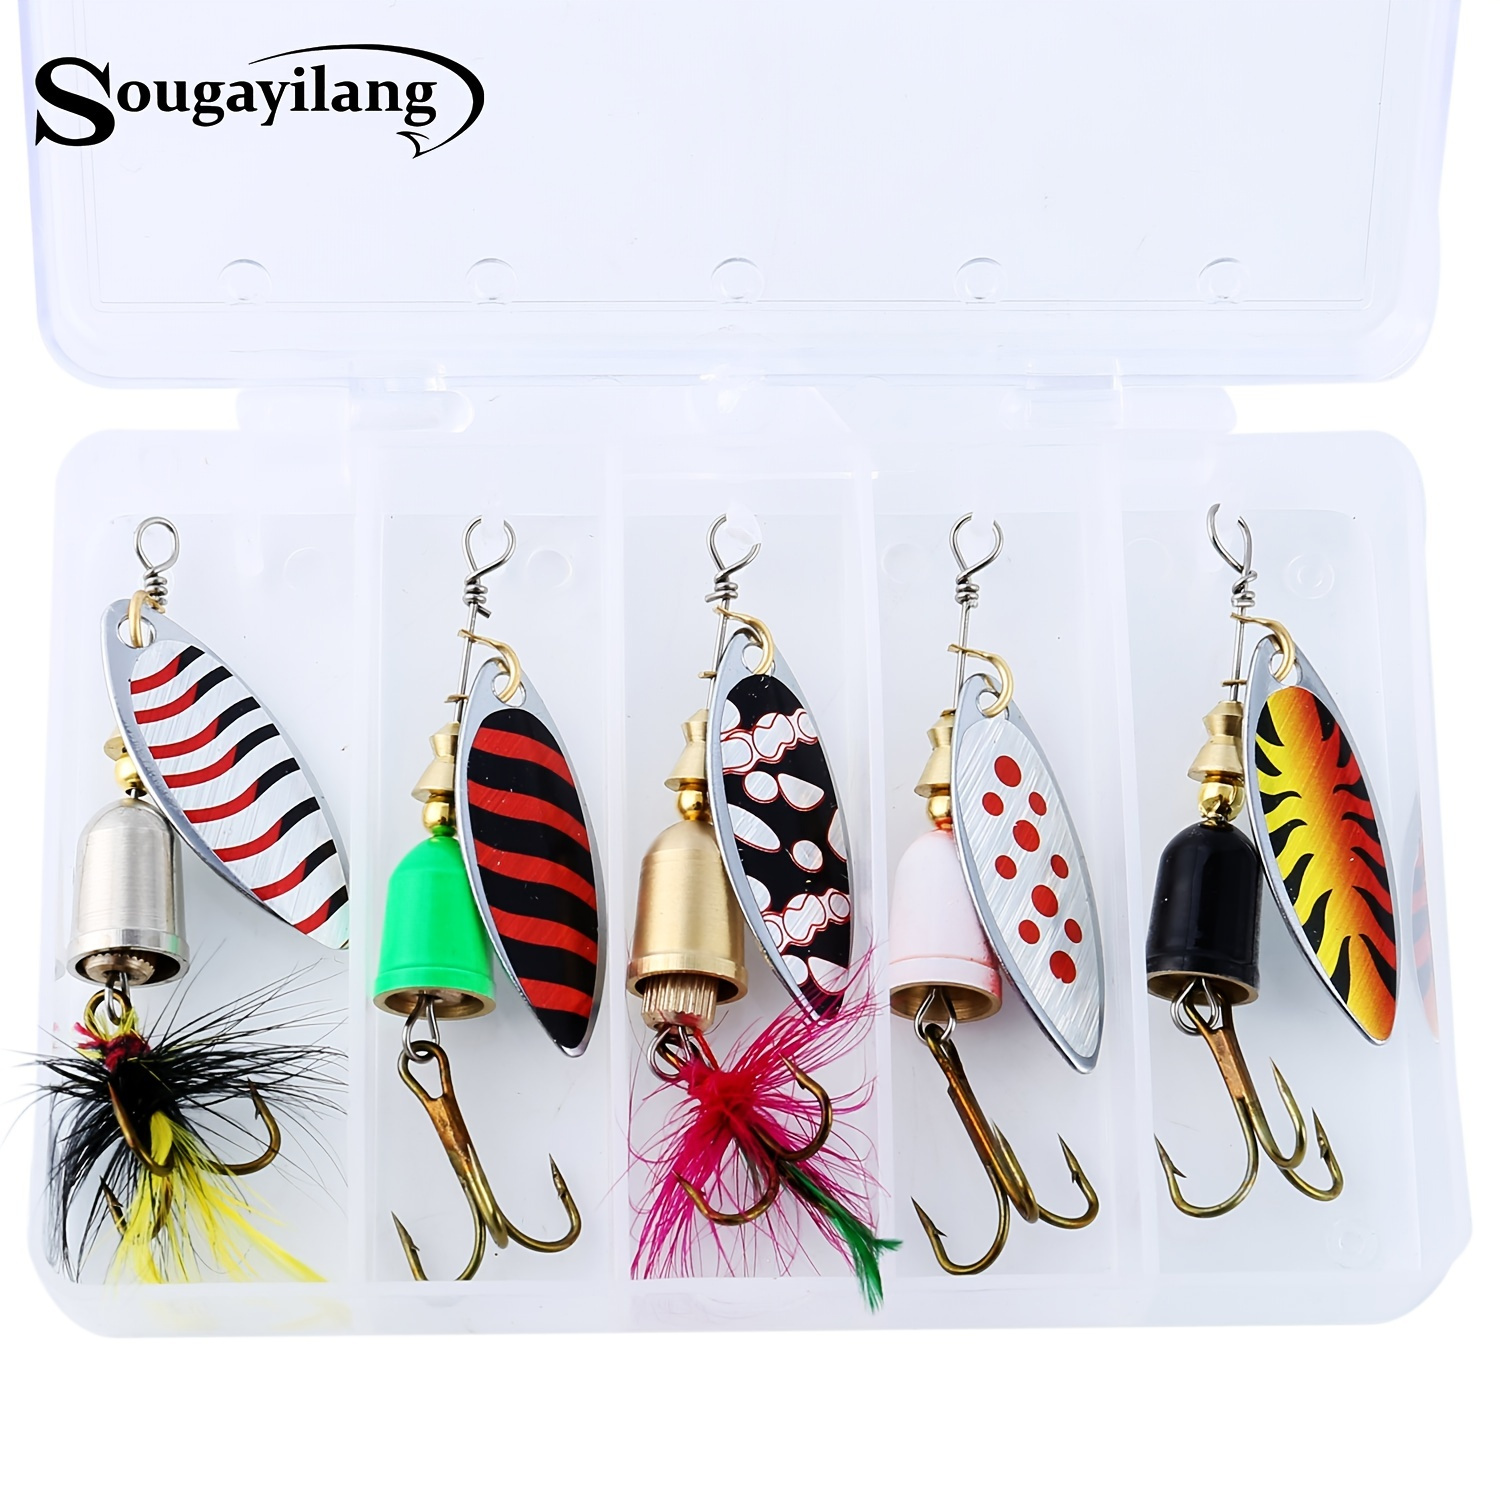 10pcs 5G Metal Fishing Lure Set - Spinners, Hard Baits, and Box Combo for  Bass, Trout, and Salmon Fishing Tackle - Enhanced Catch Rates and Durability